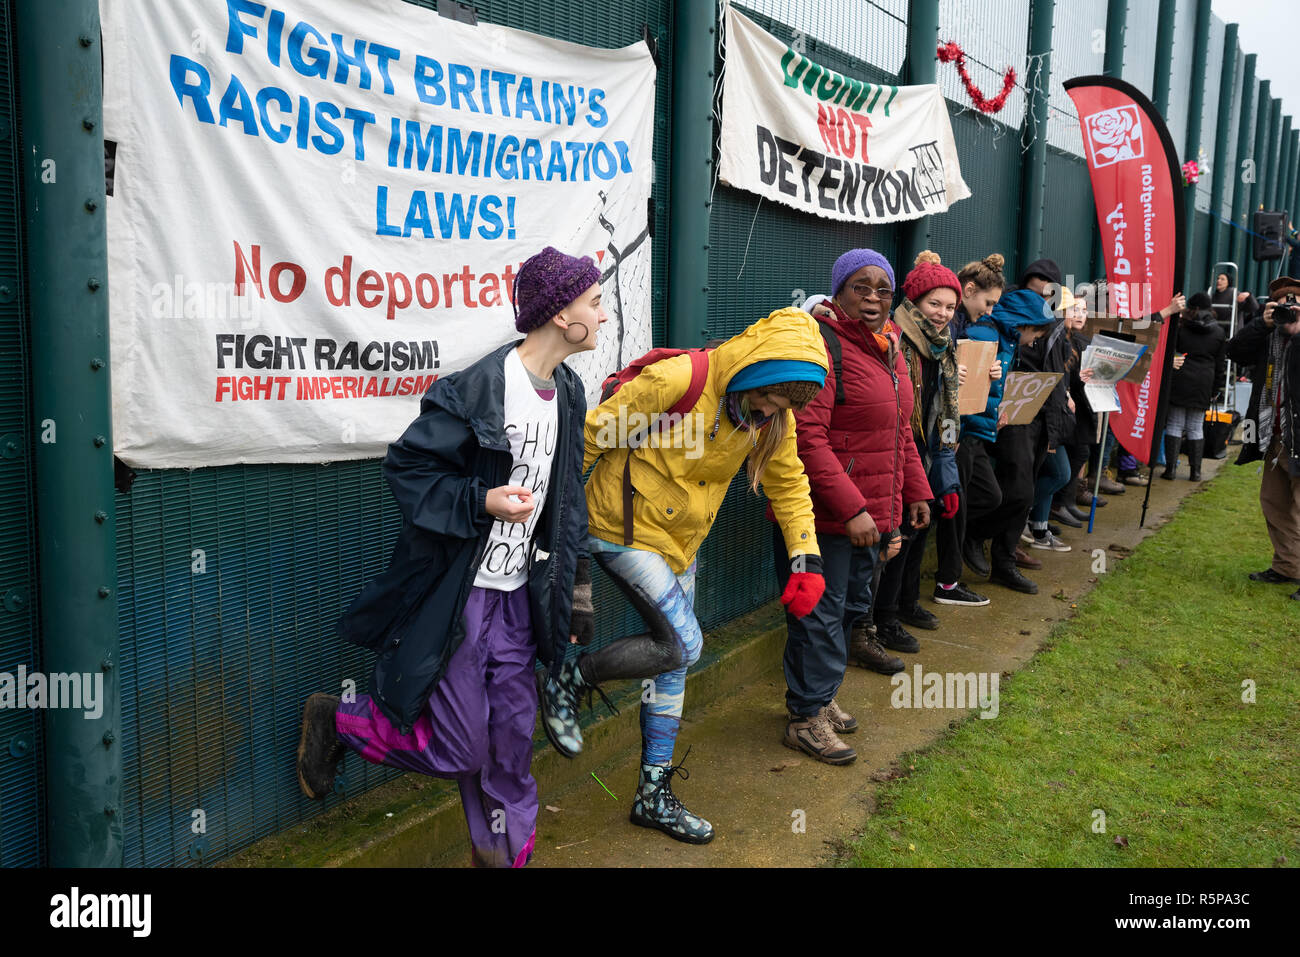 Milton Ernest, Bedford, UK. 1st December 2018. Yarls Wood Immigration Removal Centre ‘Suround Yarls Wood - Shut Down Yarls Wood and all Detention Centres’ demonstration. Hundreds braved the poor weather to join the protest at the remotely situated Yarls Wood IRC. Incarcerated women waved desperately at windows and their mobile phone conversations were relayed via the PA system outside the security fence. Speakers included those who had previously been imprisoned in Yarls Wood. This was the 15th Yarls Wood demonstration organised by Movement for Justice. Credit: Steve Bell/Alamy Live News Stock Photo